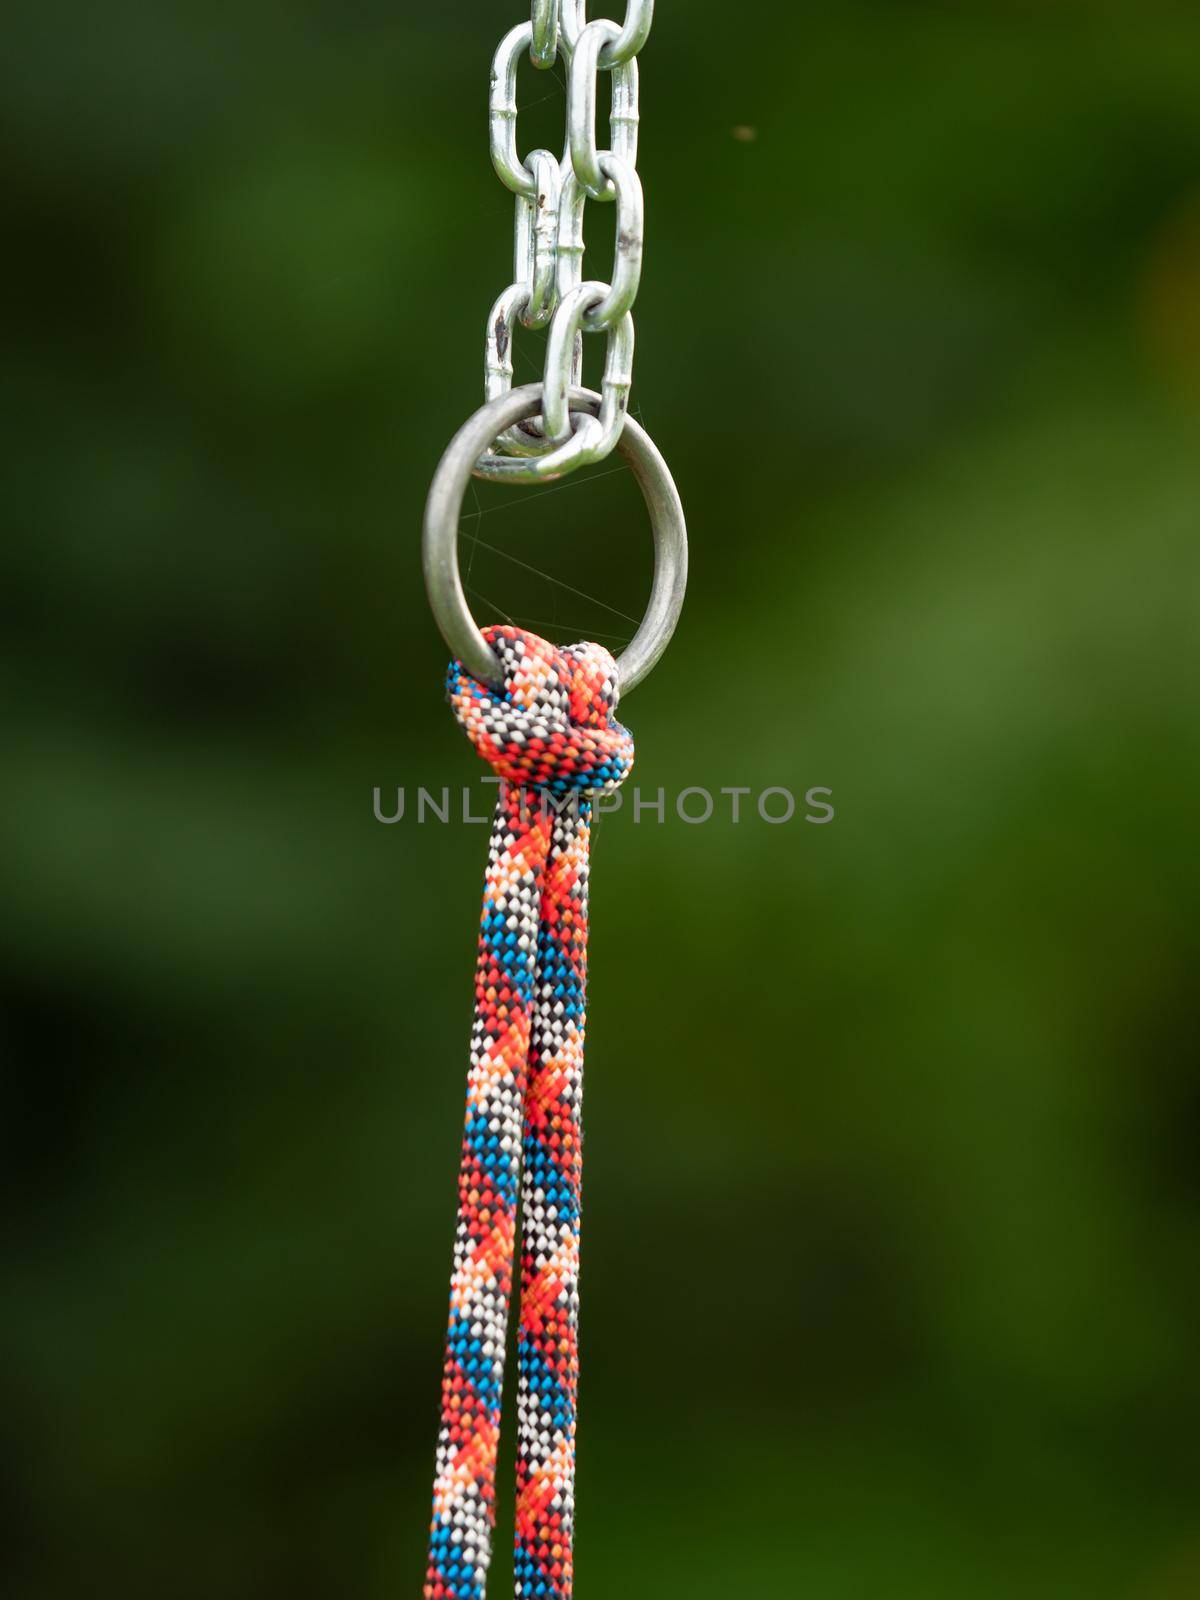 Connection of a steel chain and hemp rope on a climbing frame. by rdonar2